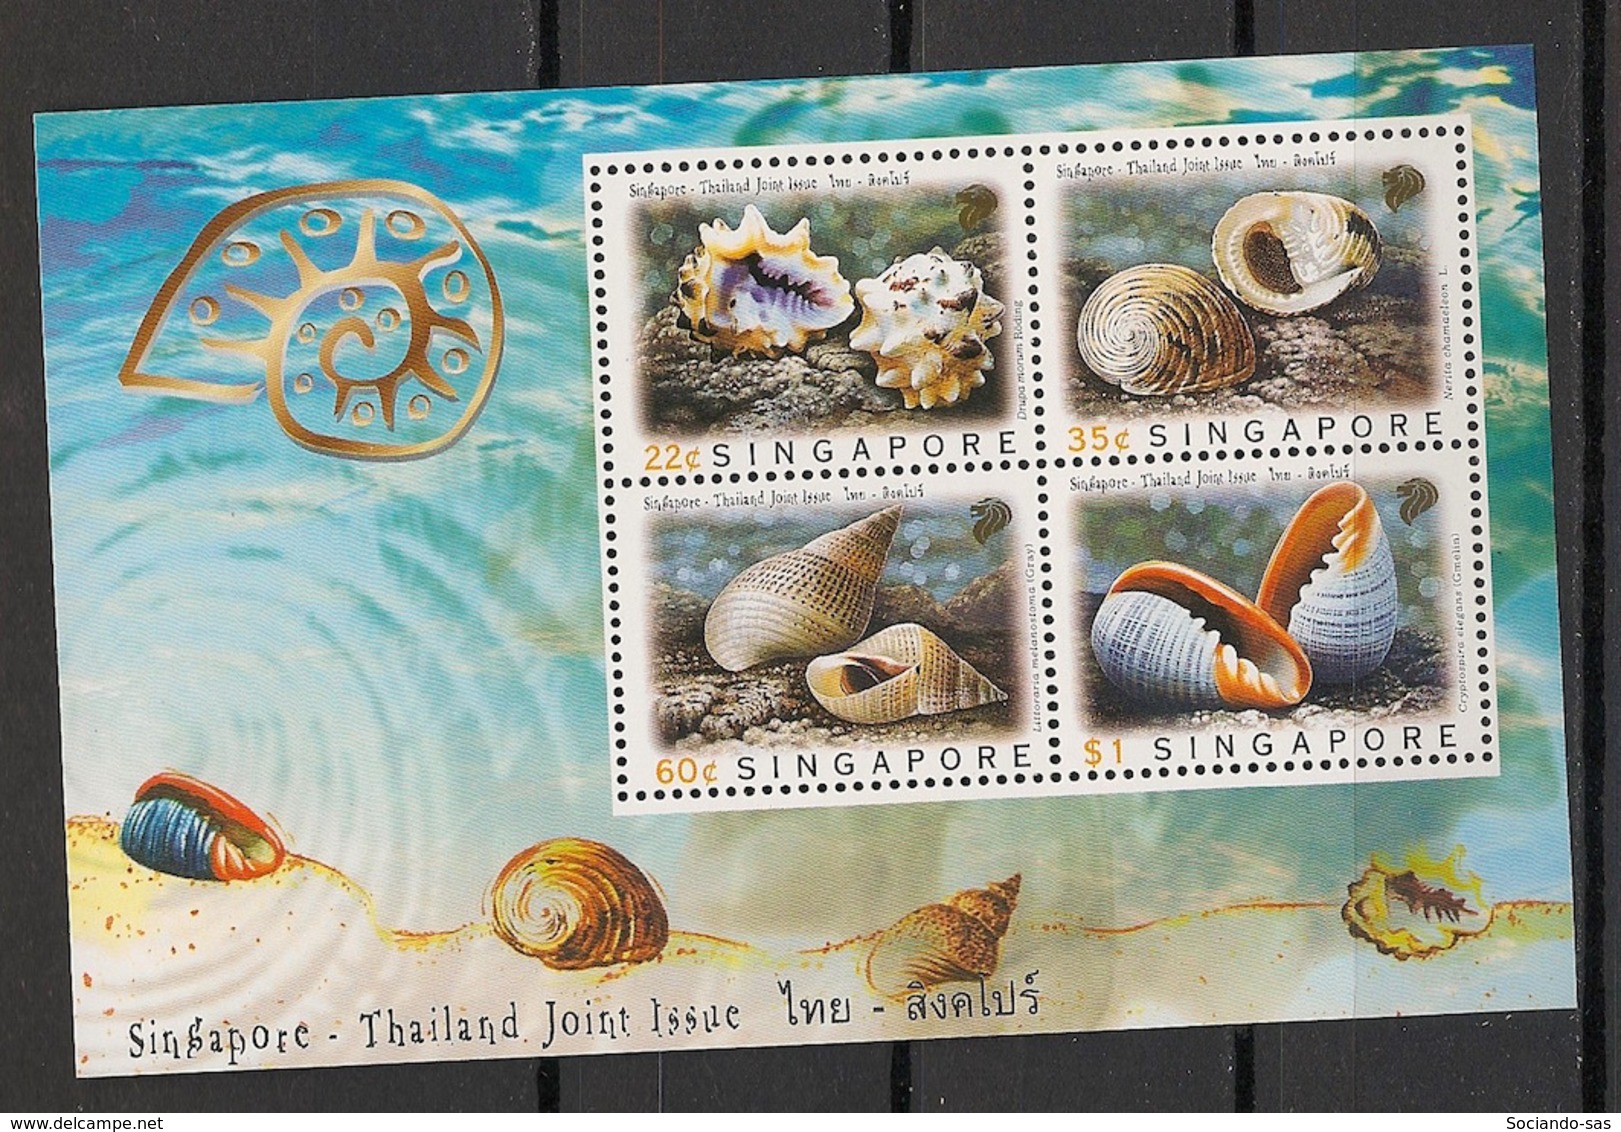 Singapore - 1997 - Bloc Feuillet BF N°Yv. 59 - Coquillages / Shells - Neuf Luxe ** / MNH / Postfrisch - Coneshells